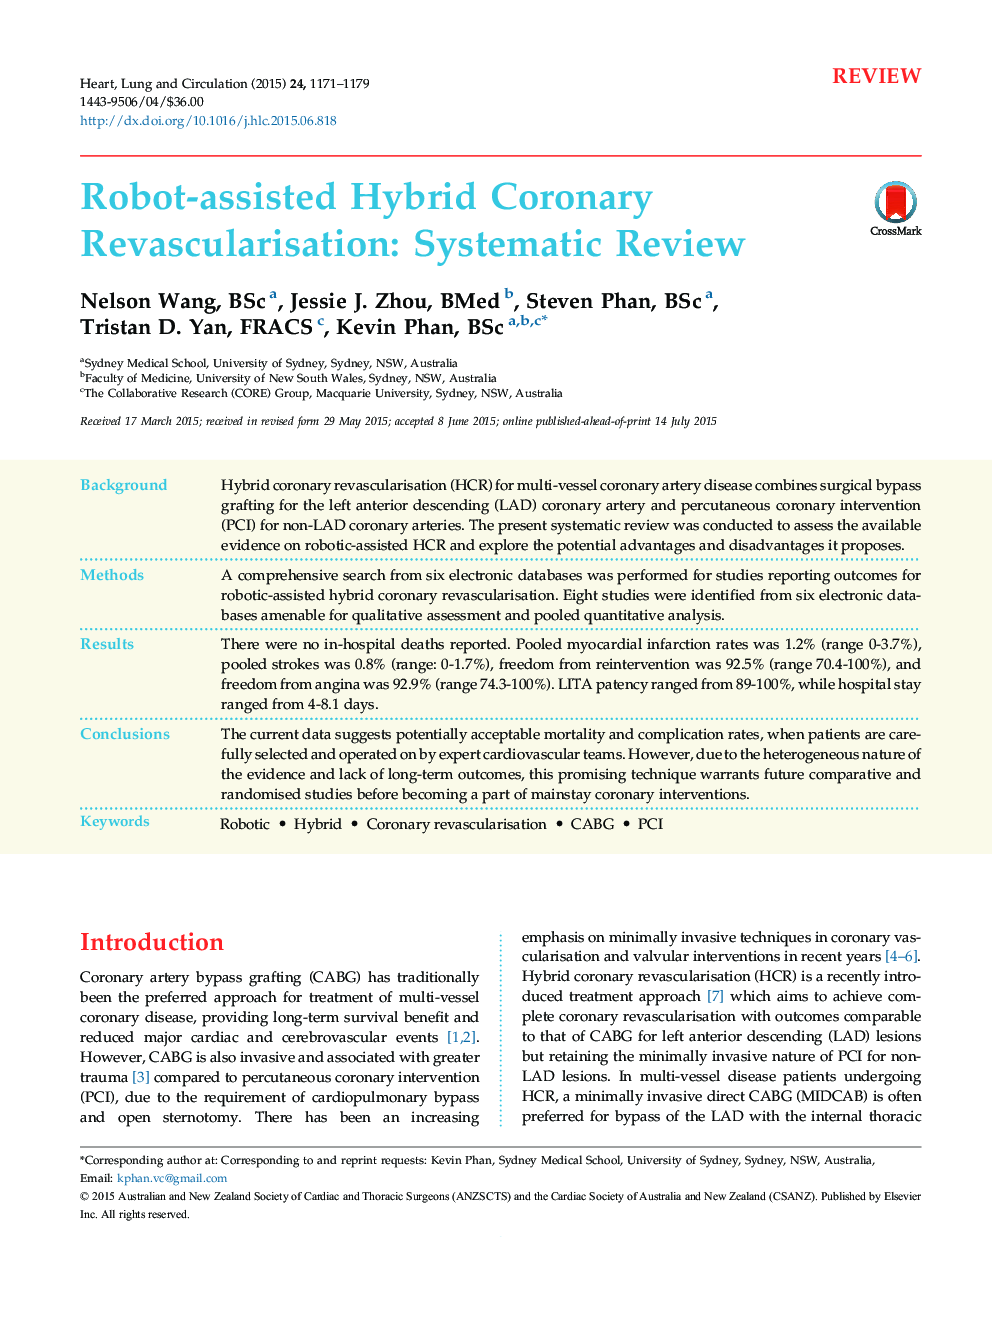 Robot-assisted Hybrid Coronary Revascularisation: Systematic Review